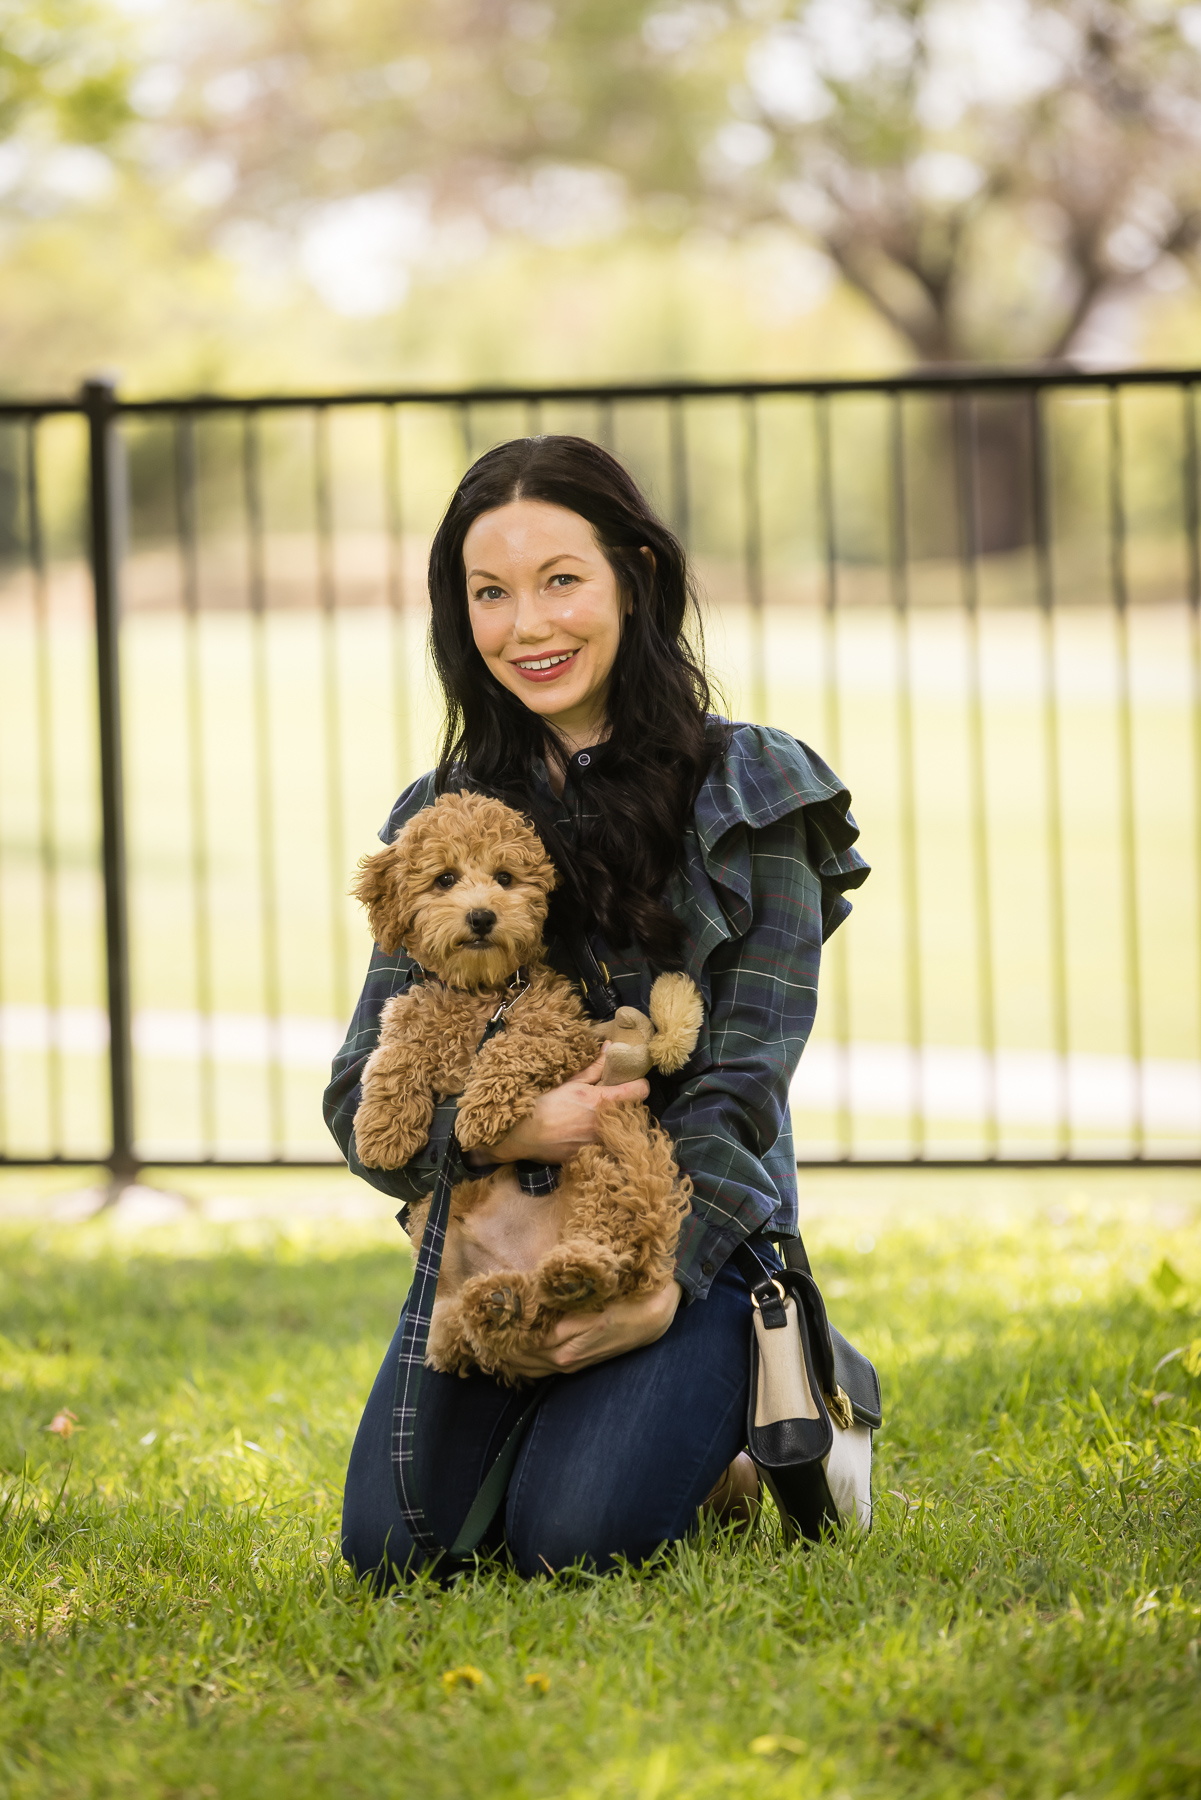 GoldenDoodle Puppy, Tartan Blouse, Tartan Bowtie and Leash, Meet My New Puppy, New Puppy Cuteness, Matching Mom and Dog Outfits, Pretty Little Shoppers Blog, Dallas Lifestyle Blog #GoldenDoodlePuppy #MeetMyPup |Charlie Cupcake by popular Dallas lifestyle blog, Pretty Little Shoppers: image of a woman wearing a plaid ruffle top and jeans and holding her goldendoodle puppy. 